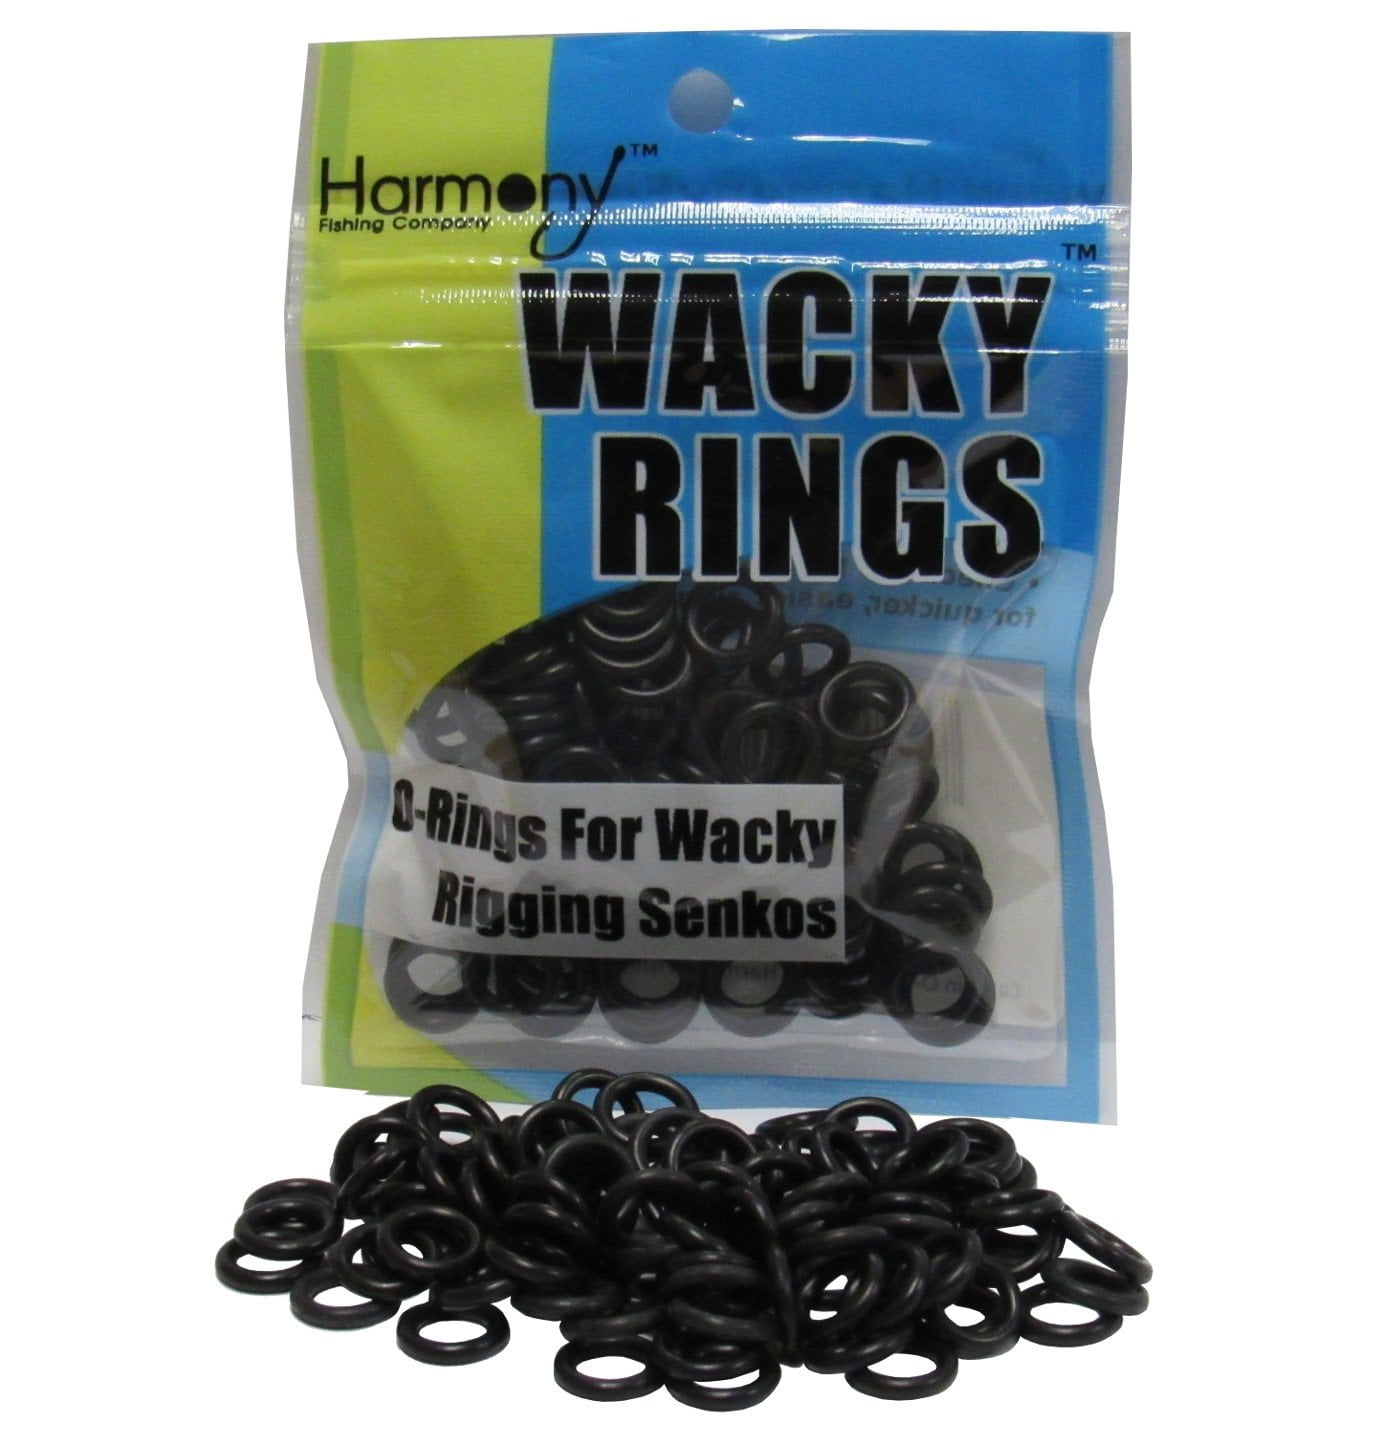 Wacky Rings - O-Rings for Wacky Rigging Senko Worms 100 orings for 4+5 inch  Senkos, Available in many colors